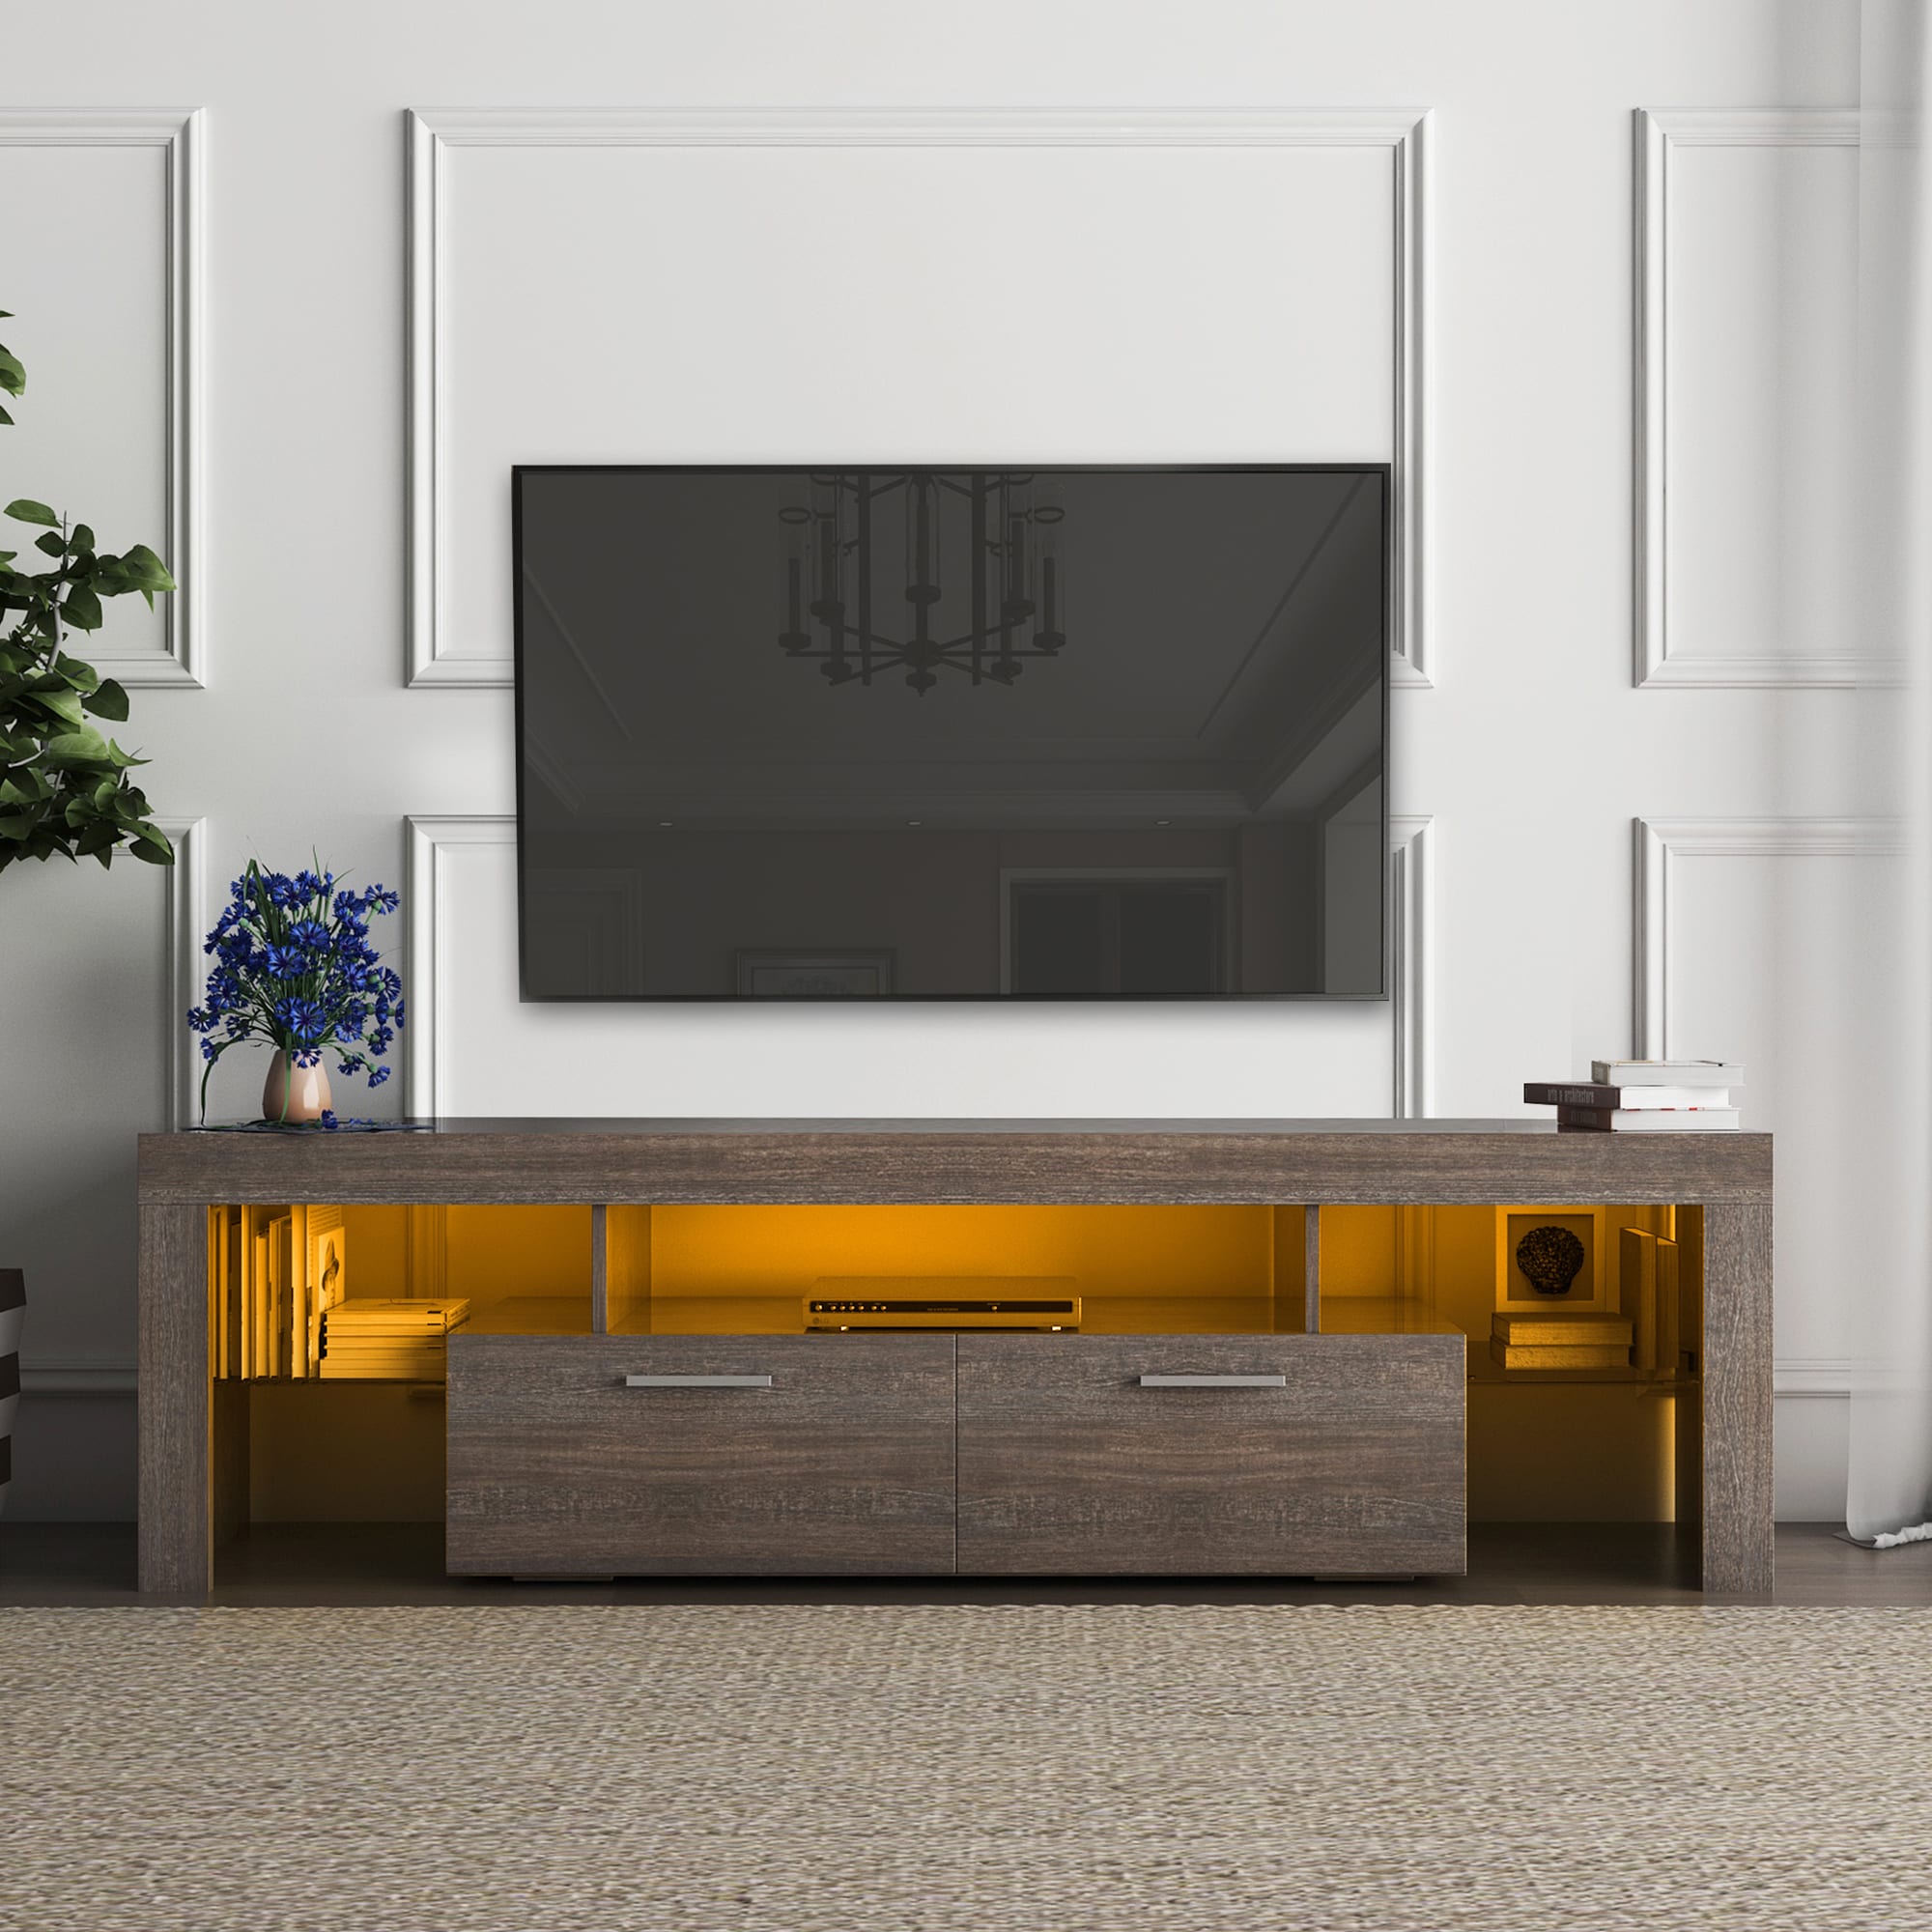 WELLFOR JXY LED Entertainment Center TV stand Modern/Contemporary Brown ...